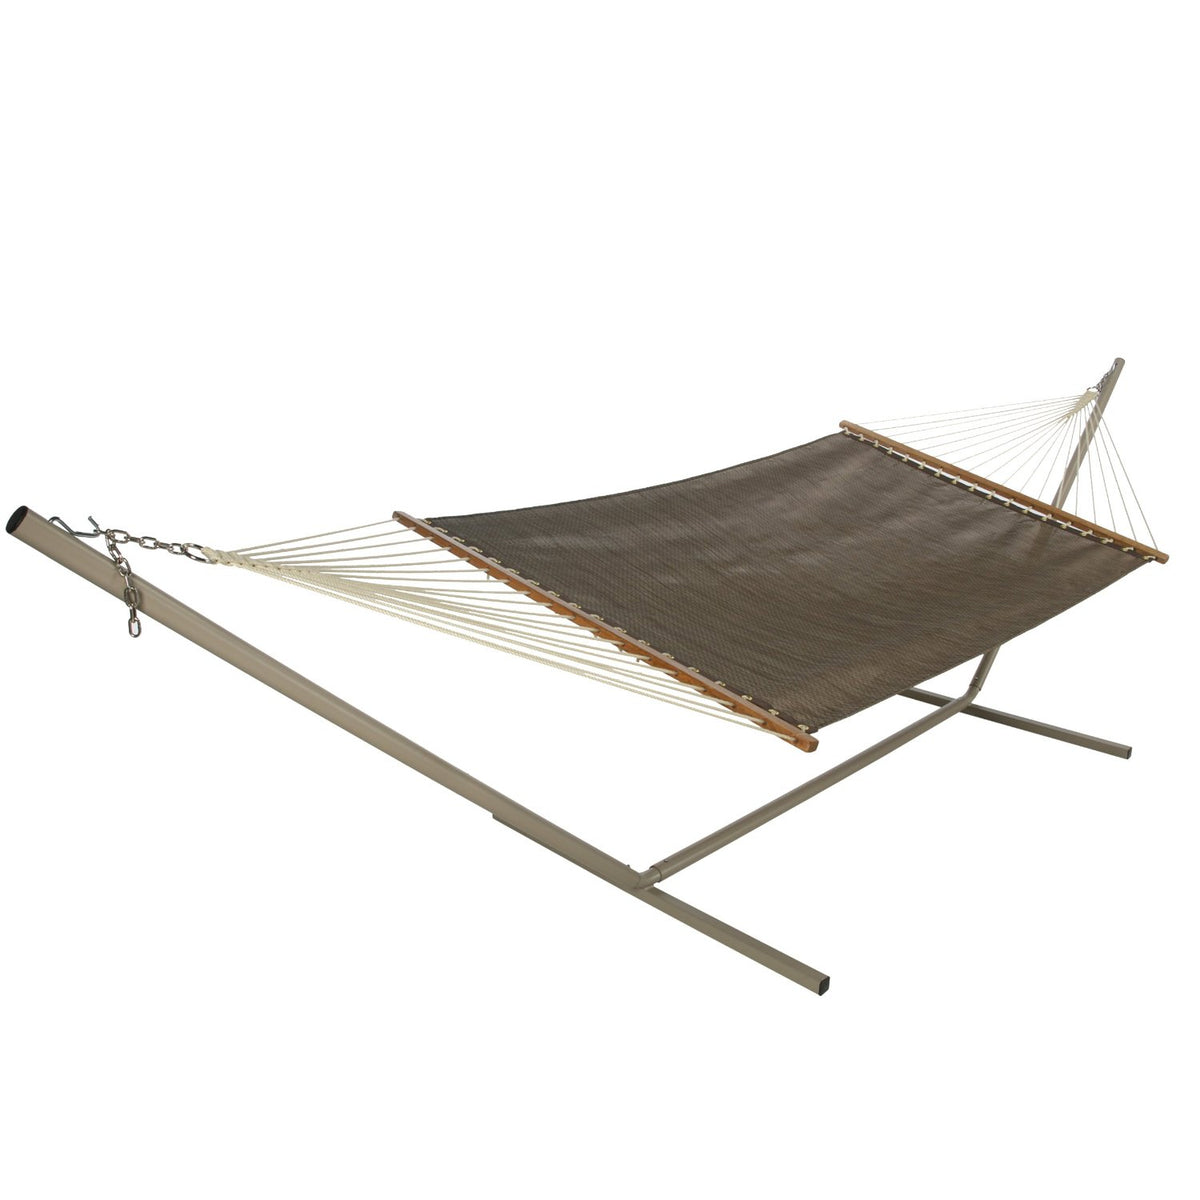 buy outdoor hammocks, stands & accessories at cheap rate in bulk. wholesale & retail outdoor storage & cooking items store.